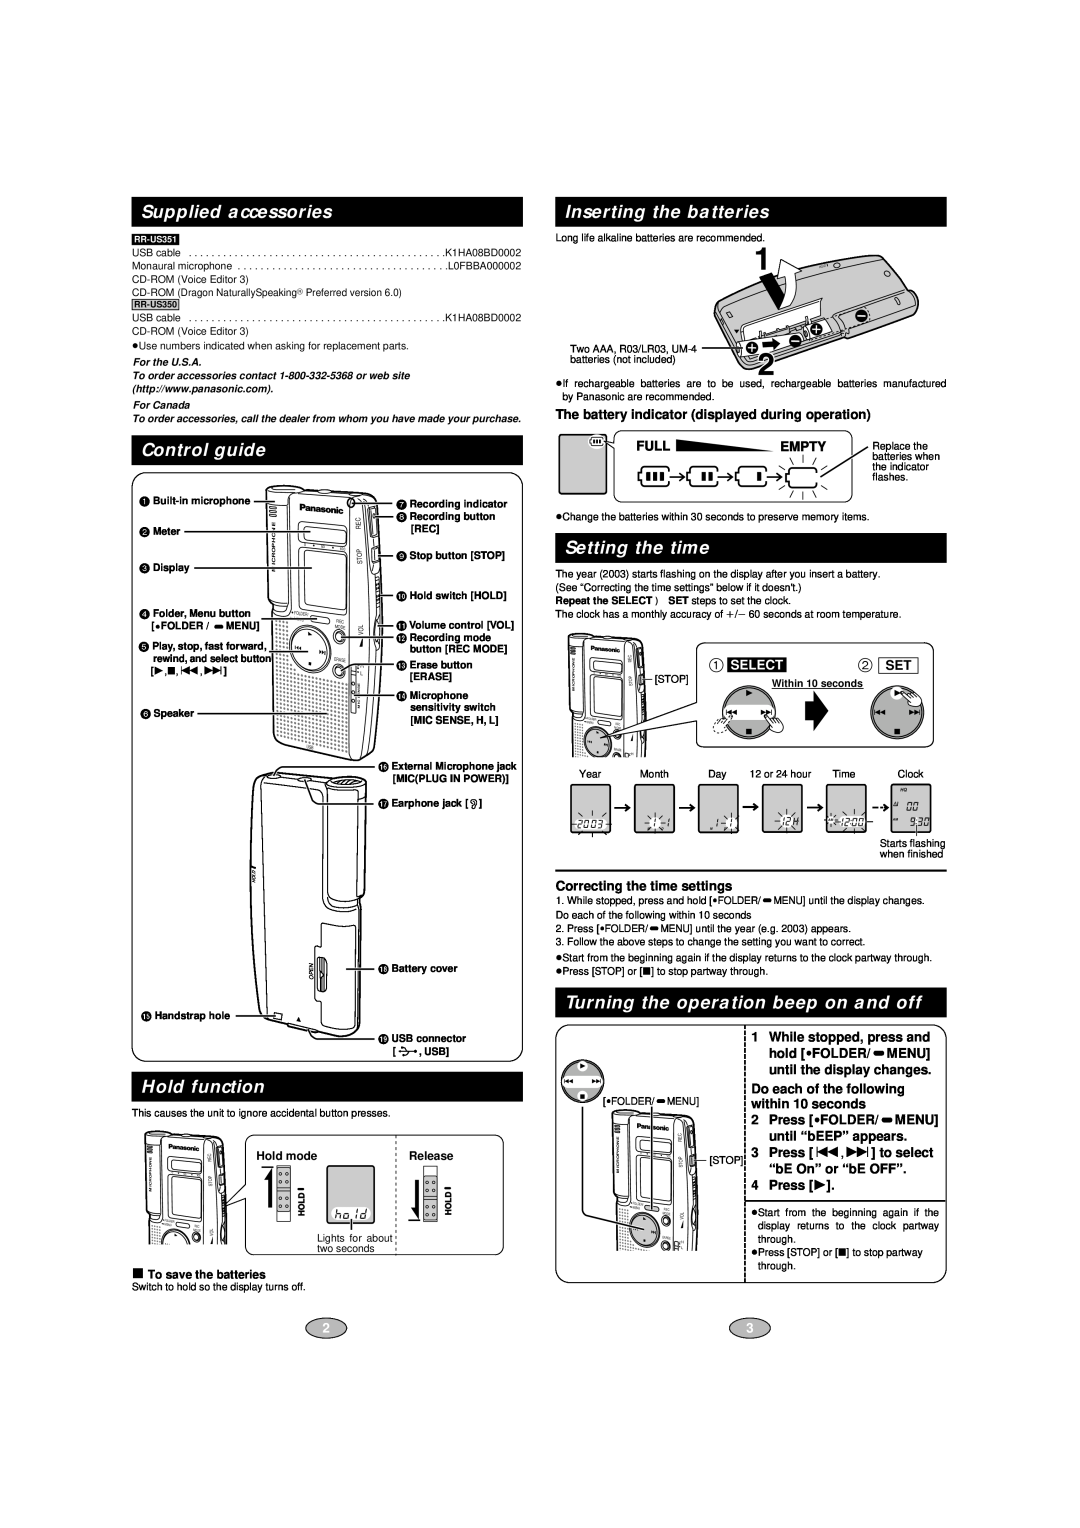 Panasonic RR-US350 Supplied accessories, Control guide, Inserting the batteries, Setting the time, Hold function, Select 